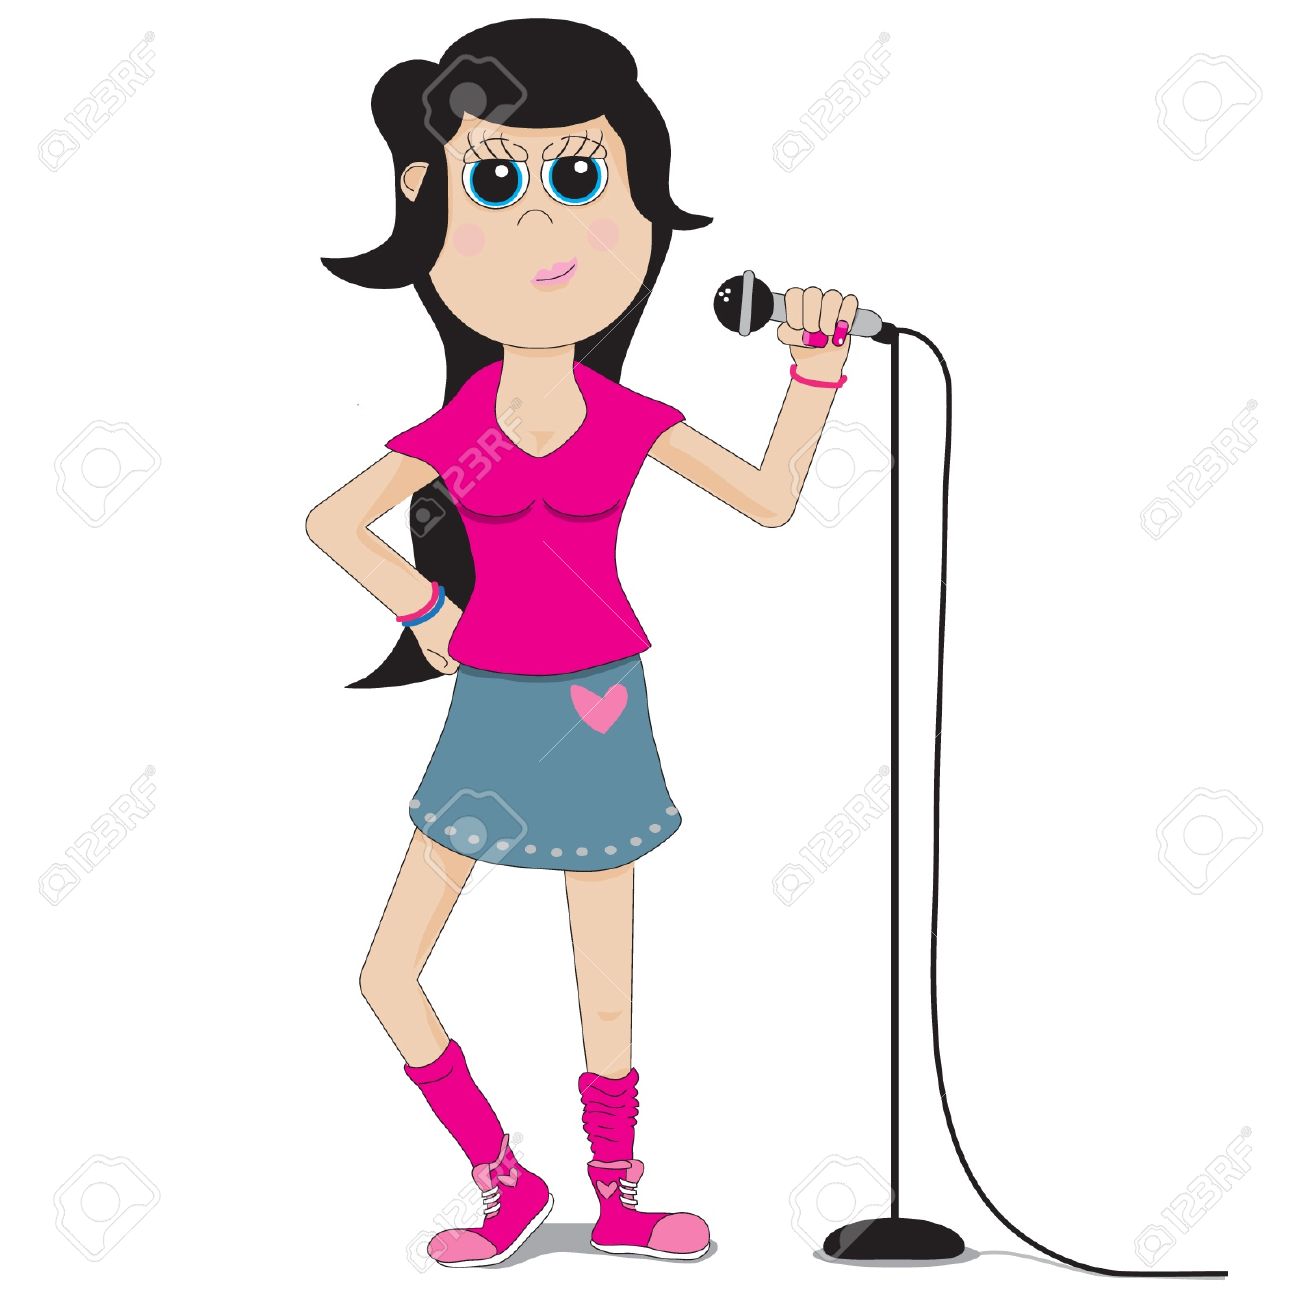 Cartoon teen girl singer wearing a pink shirt holding a microphone on a  microphone stand Stock